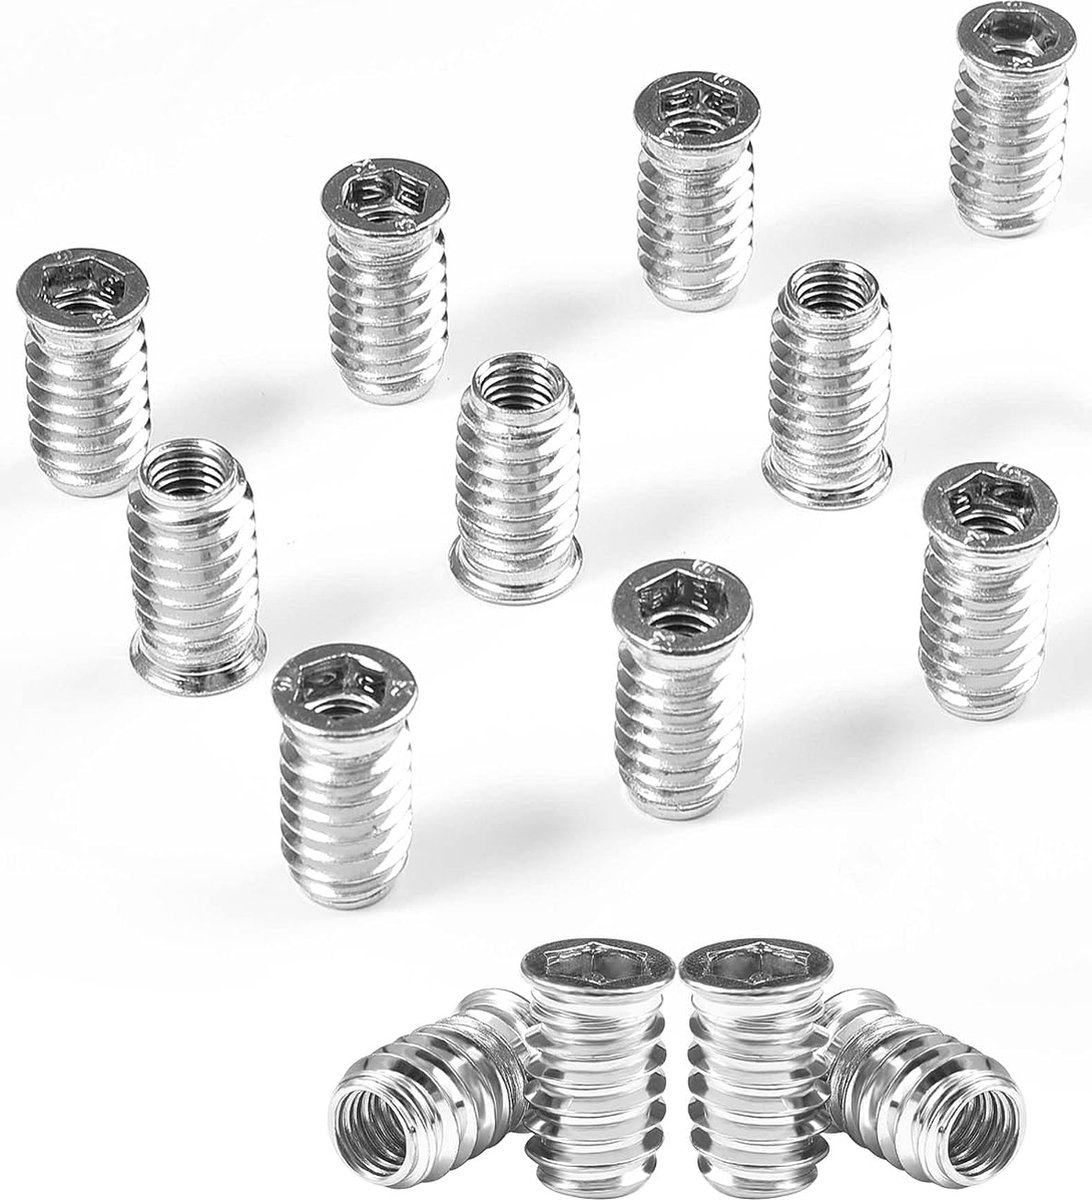 Screw-In Nuts M10 Screw-In Sleeves M10 x 25 mm Socket Screw Nut Threaded Bushing with Covering Edge Threaded Insert Hex Socket Nuts Nickel-Plated Carbon Steel for Wooden Furniture Pack of 50